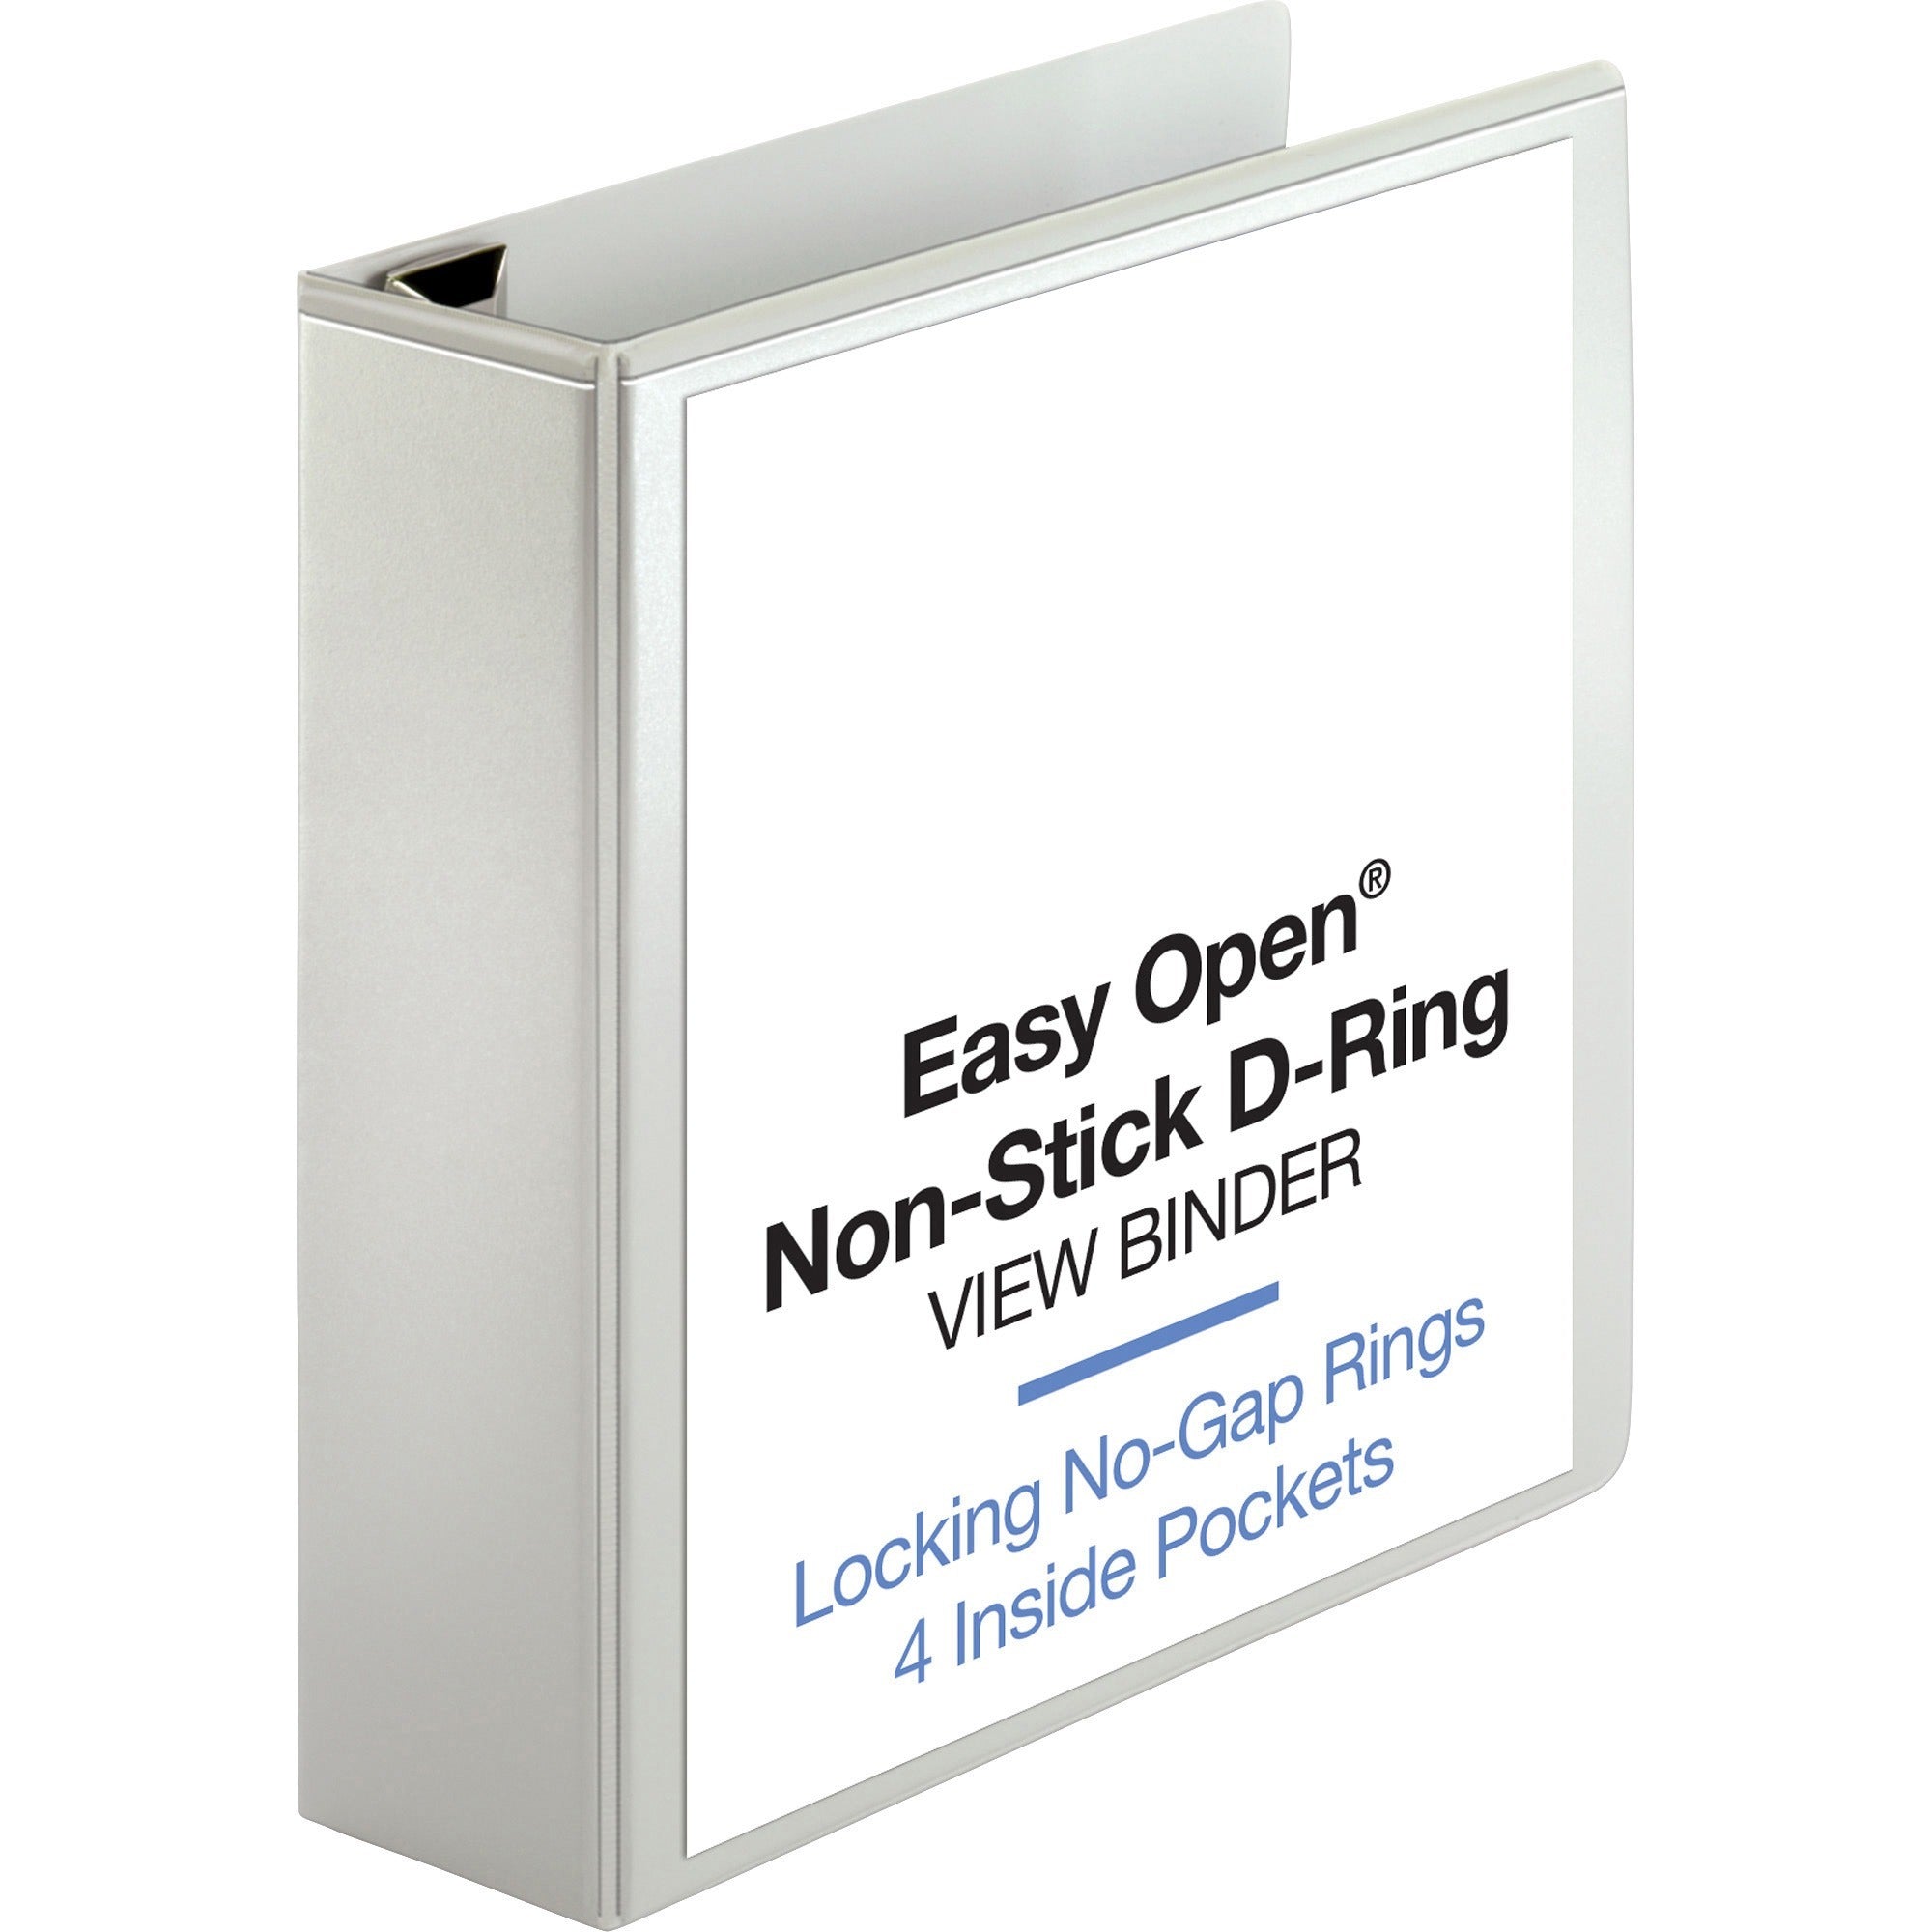 business-source-locking-d-ring-view-binder-3-binder-capacity-letter-8-1-2-x-11-sheet-size-650-sheet-capacity-d-ring-fasteners-4-inside-front-&-back-pockets-polypropylene-chipboard-white-recycled-acid-free-non-glare-clear_bsn26961 - 1